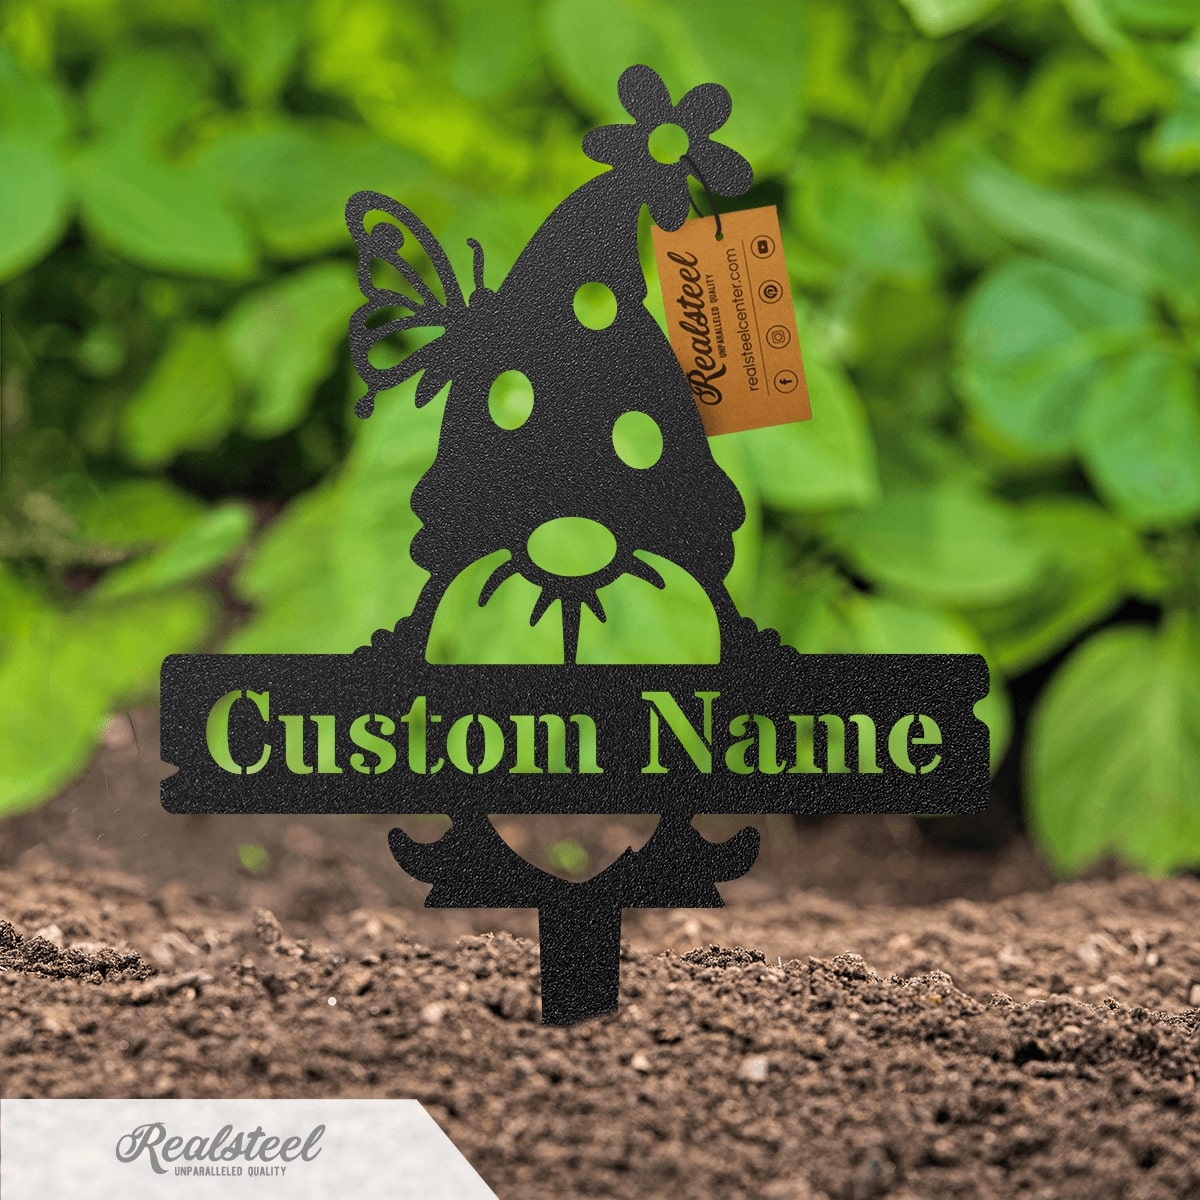 Personalize Your Garden: Custom Garden Gnome Plant Markers